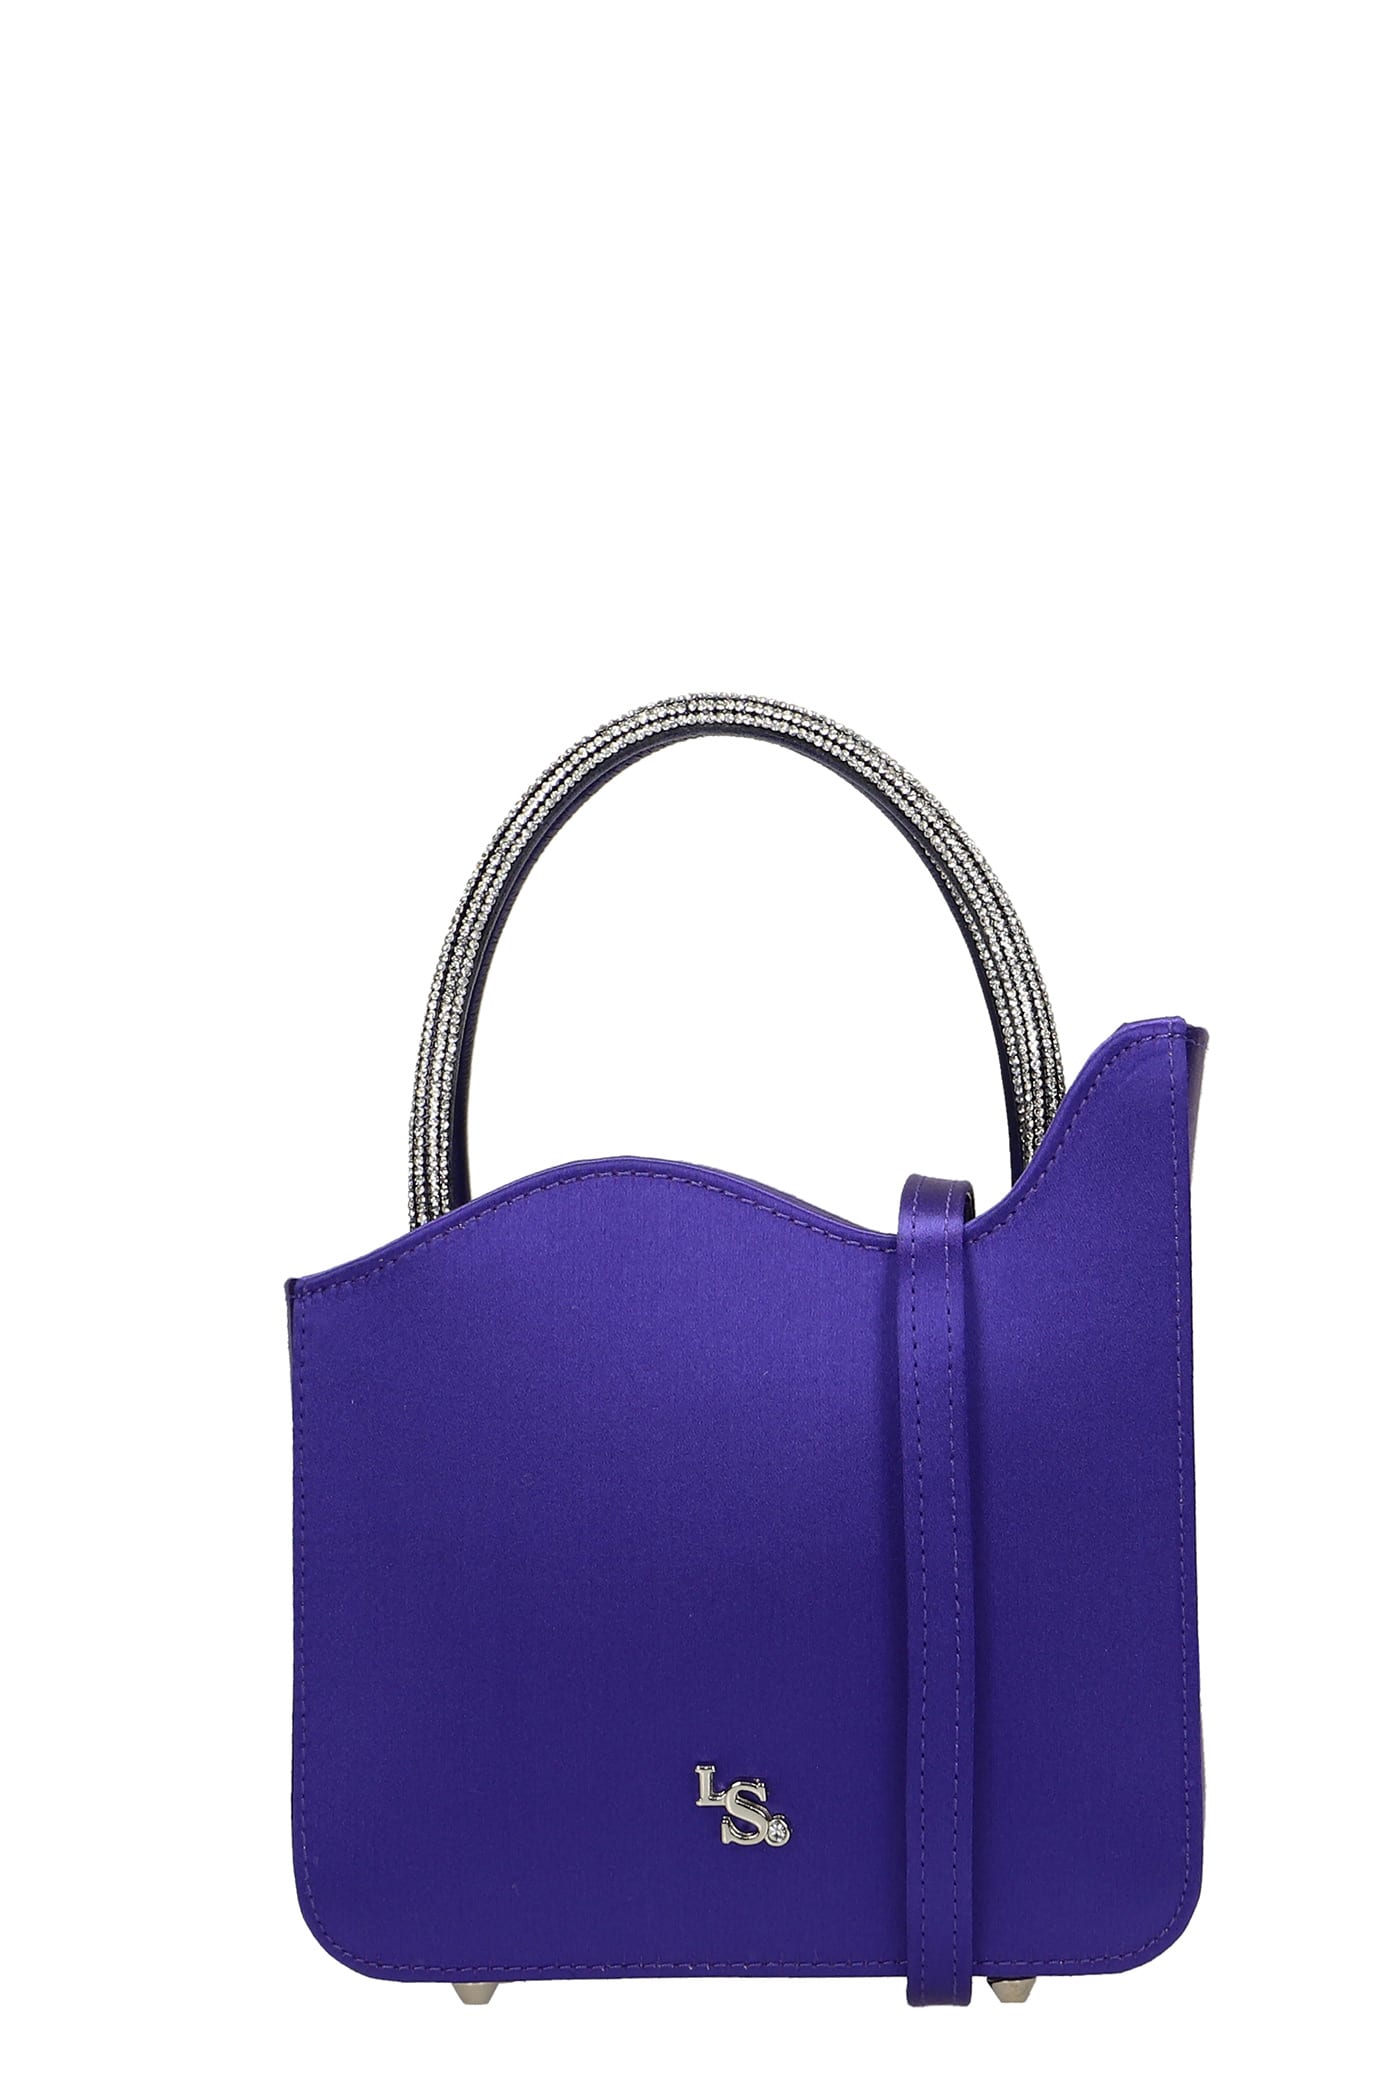 Le Silla Ivy Hand Bag In Viola Leather